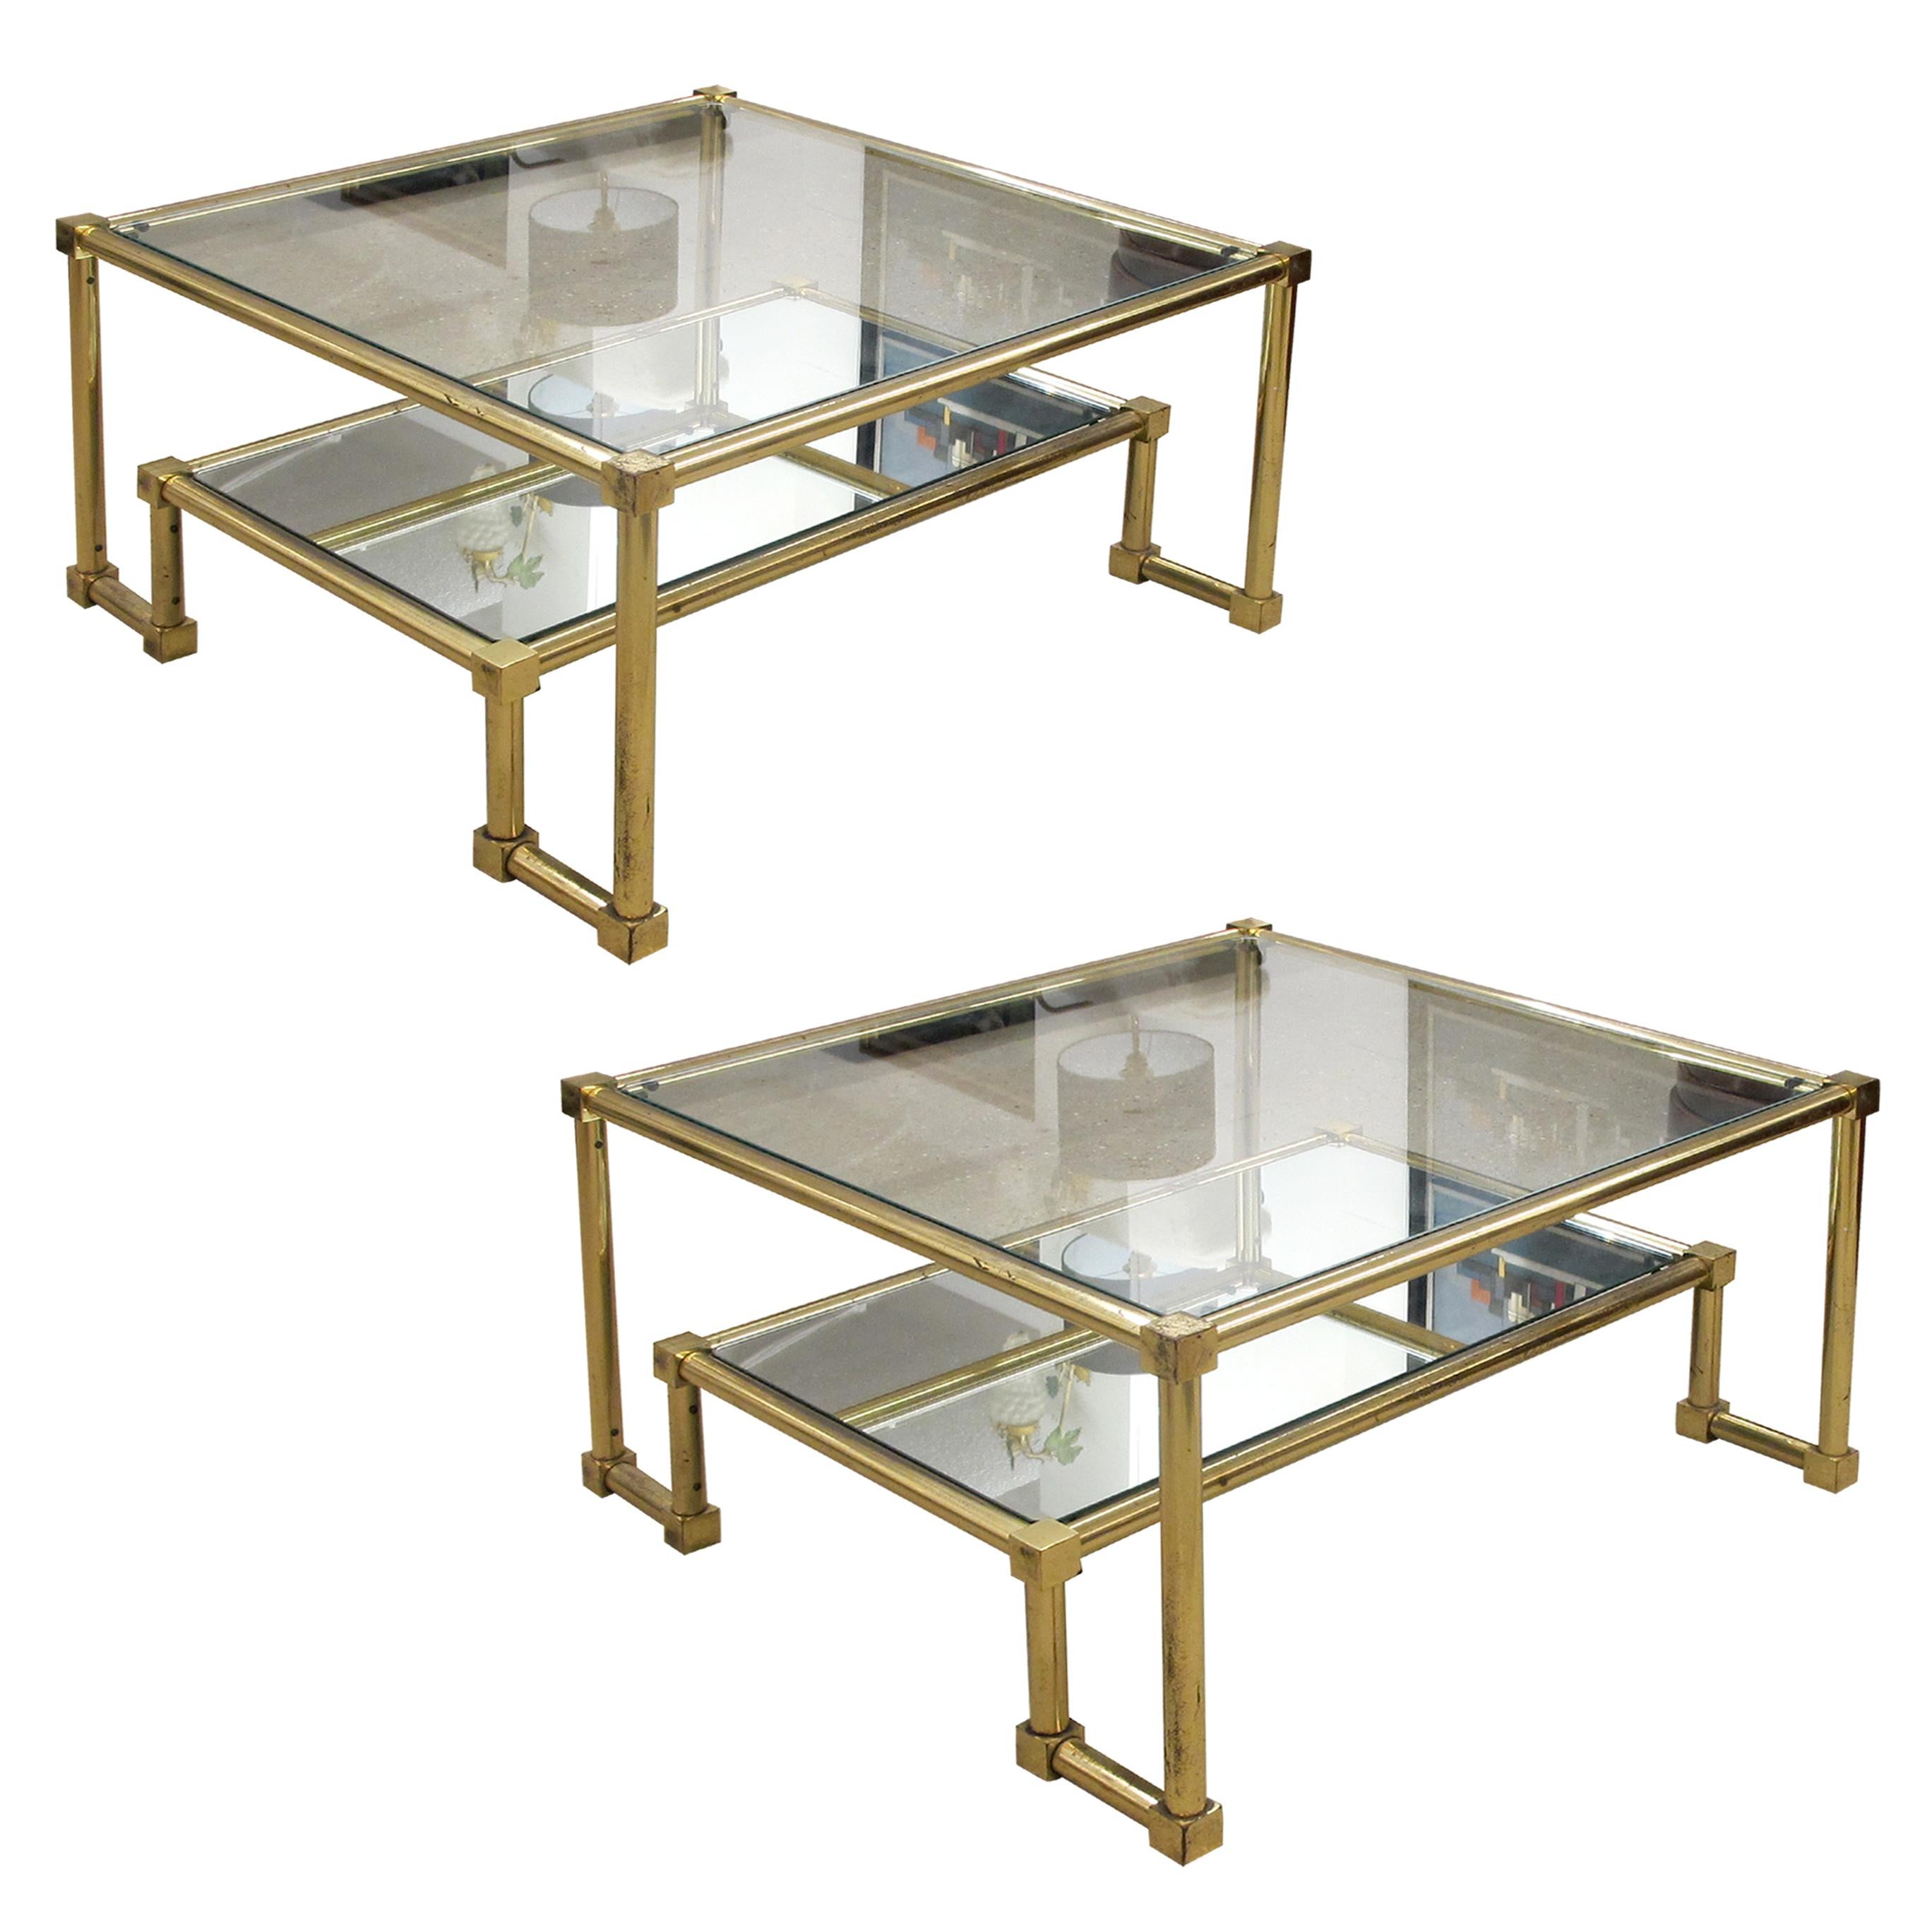 Pair of geometric Neoclassical two-tier brass coffee tables/side tables in the manner of Guy Lefevre, with clear glass tops and mirrored lower tiers. The tables are very versatile, they will look good to joined together to form a large coffee table.